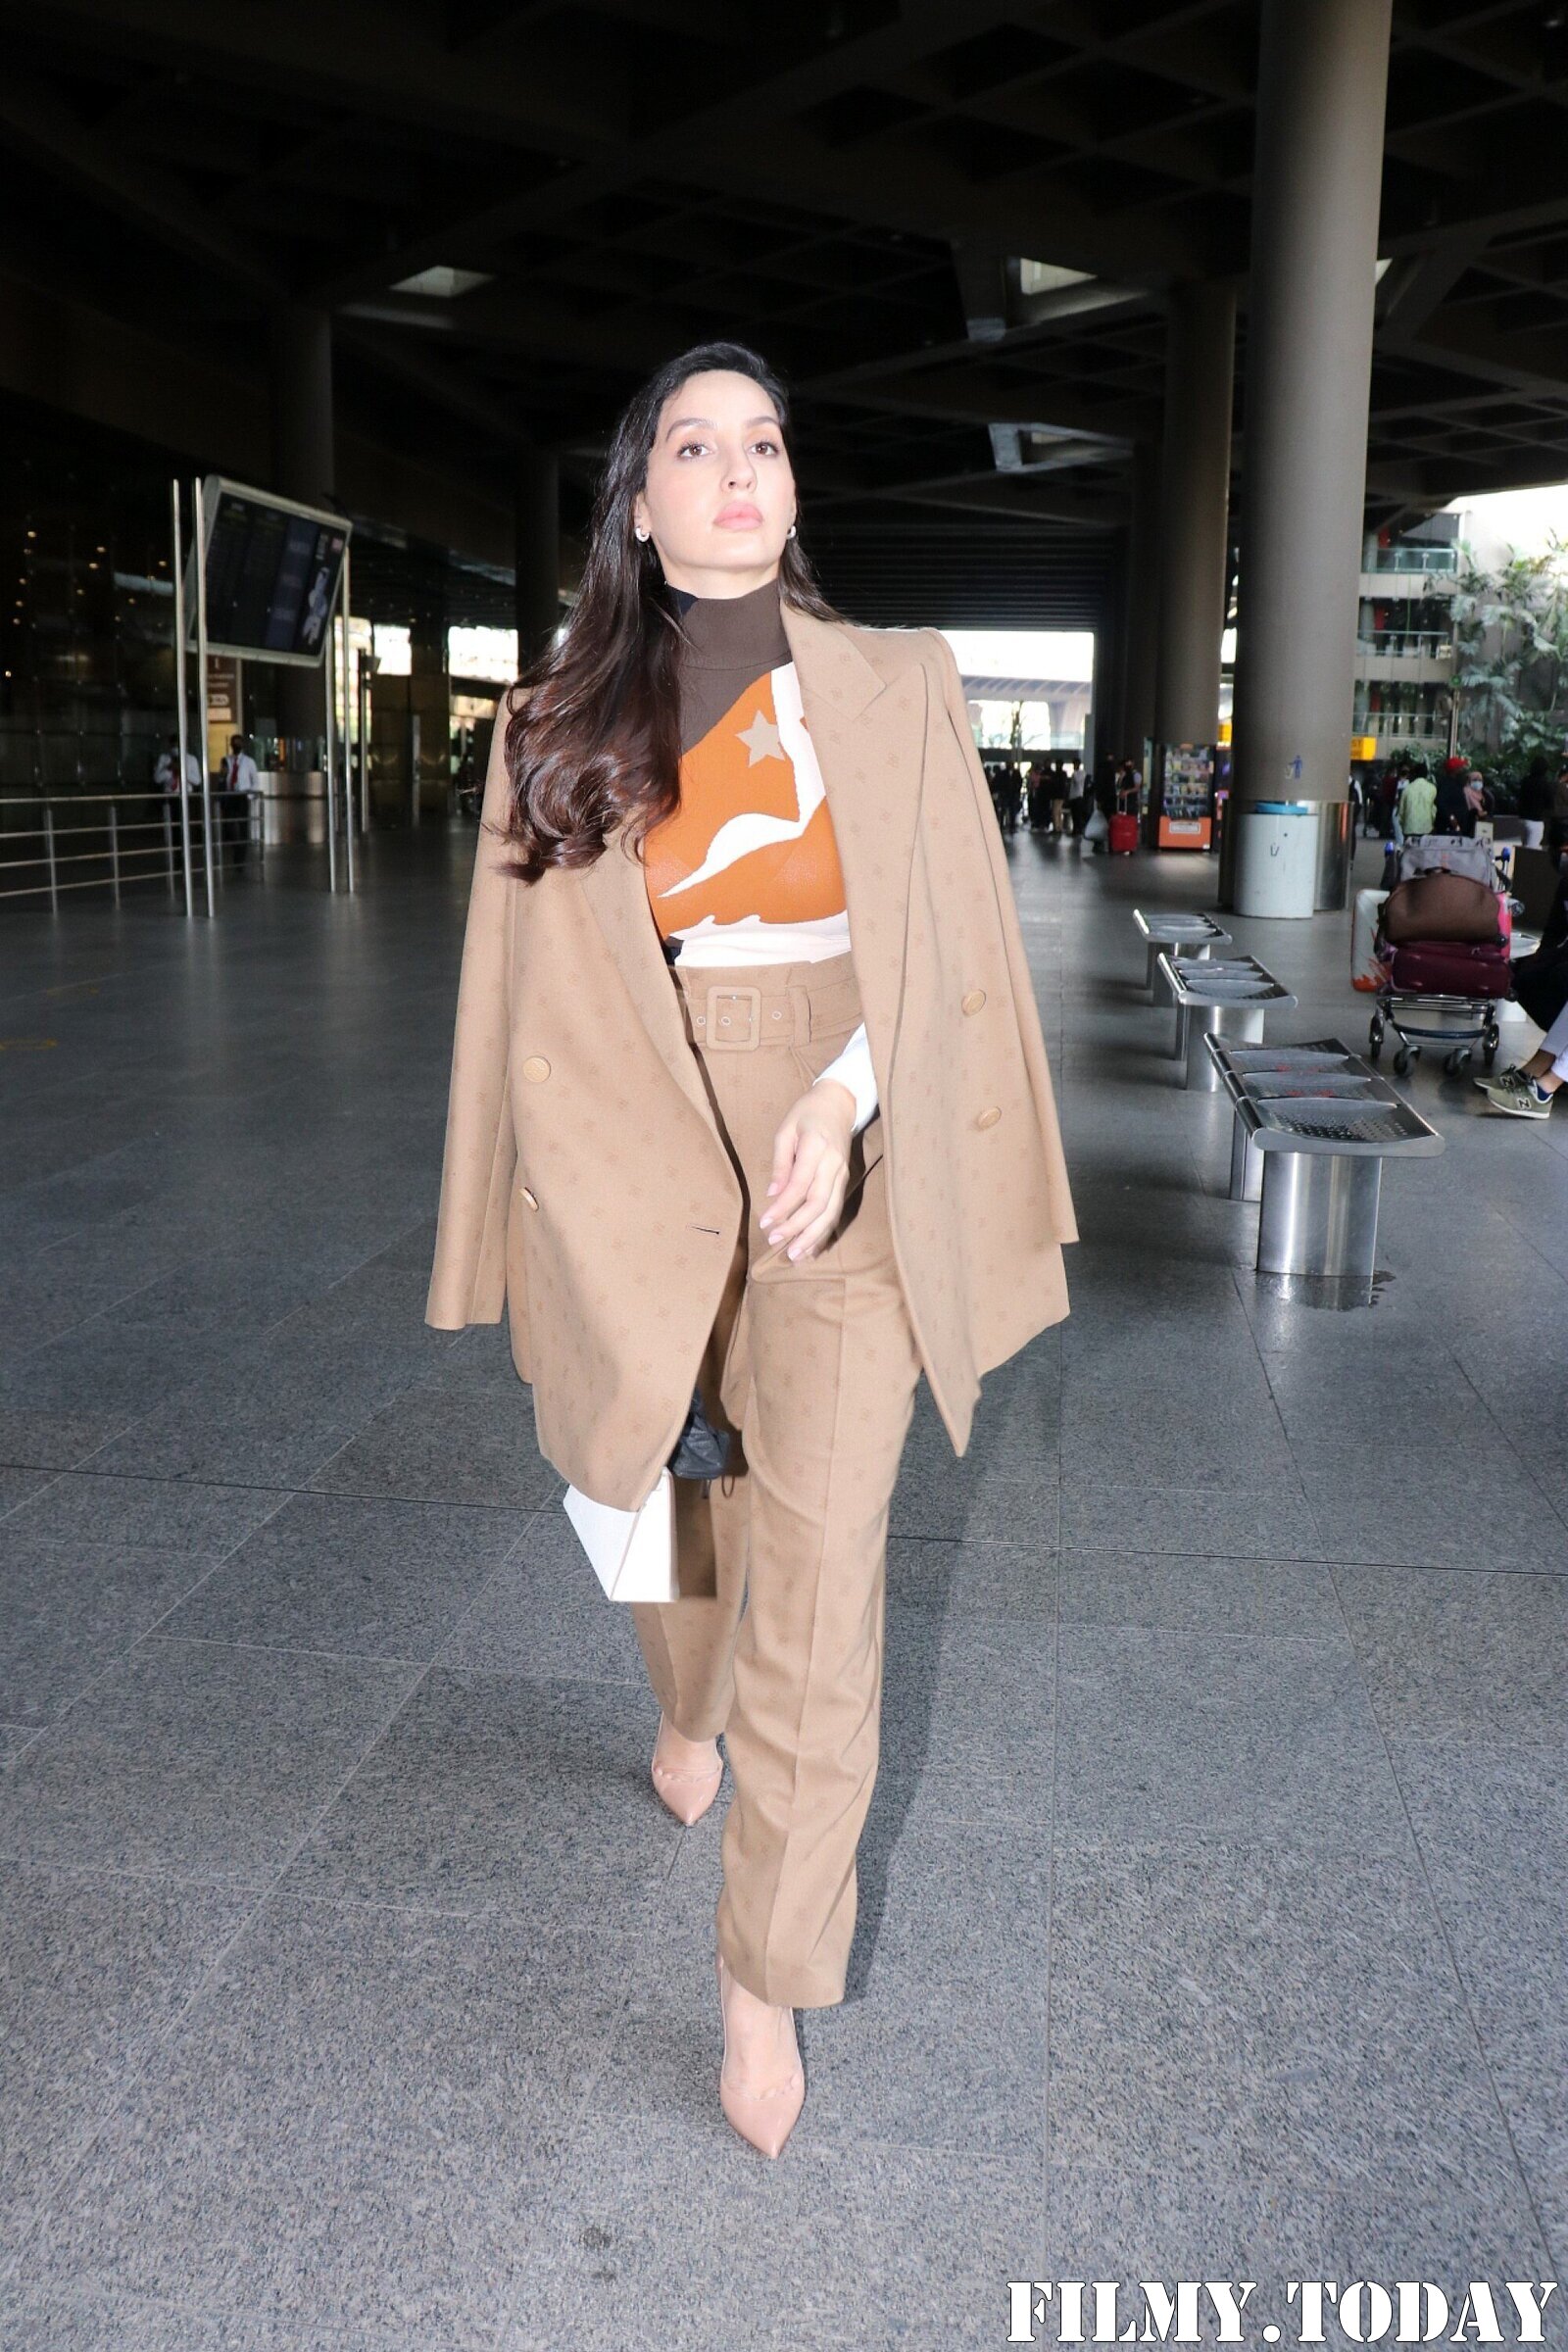 Nora Fatehi - Photos: Celebs Spotted At Airport | Picture 1861188